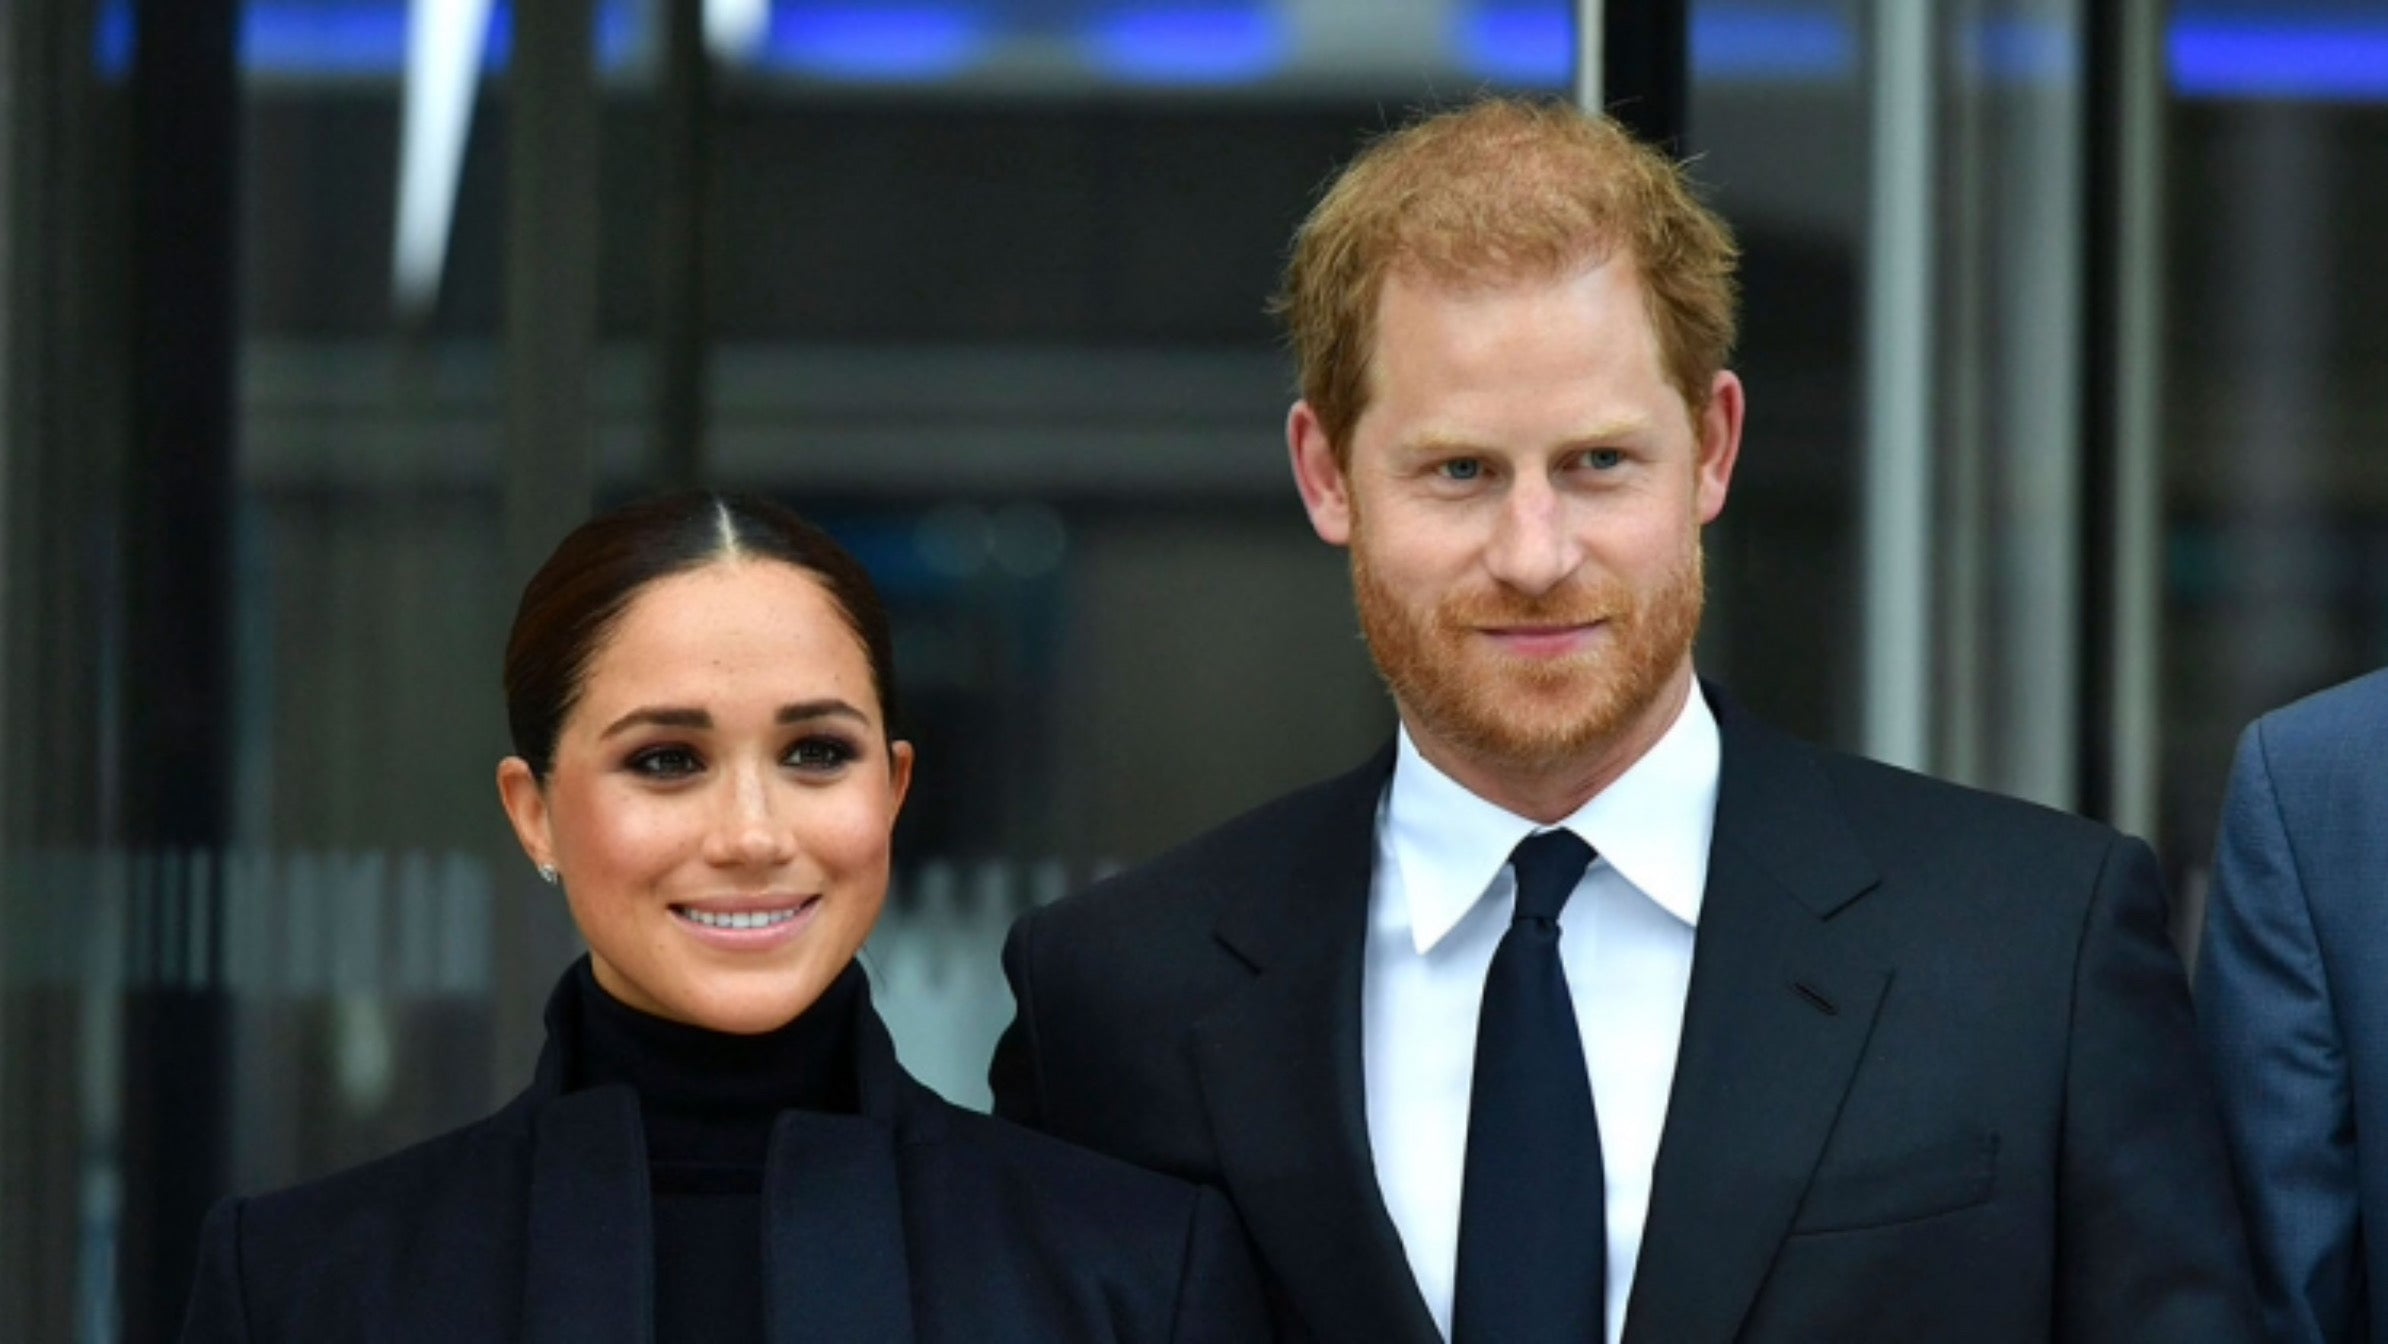 Tensions in the British Royal Family: Charles III withdraws Harry and Meghan&#8217;s residence in the UK, Magnate Daily